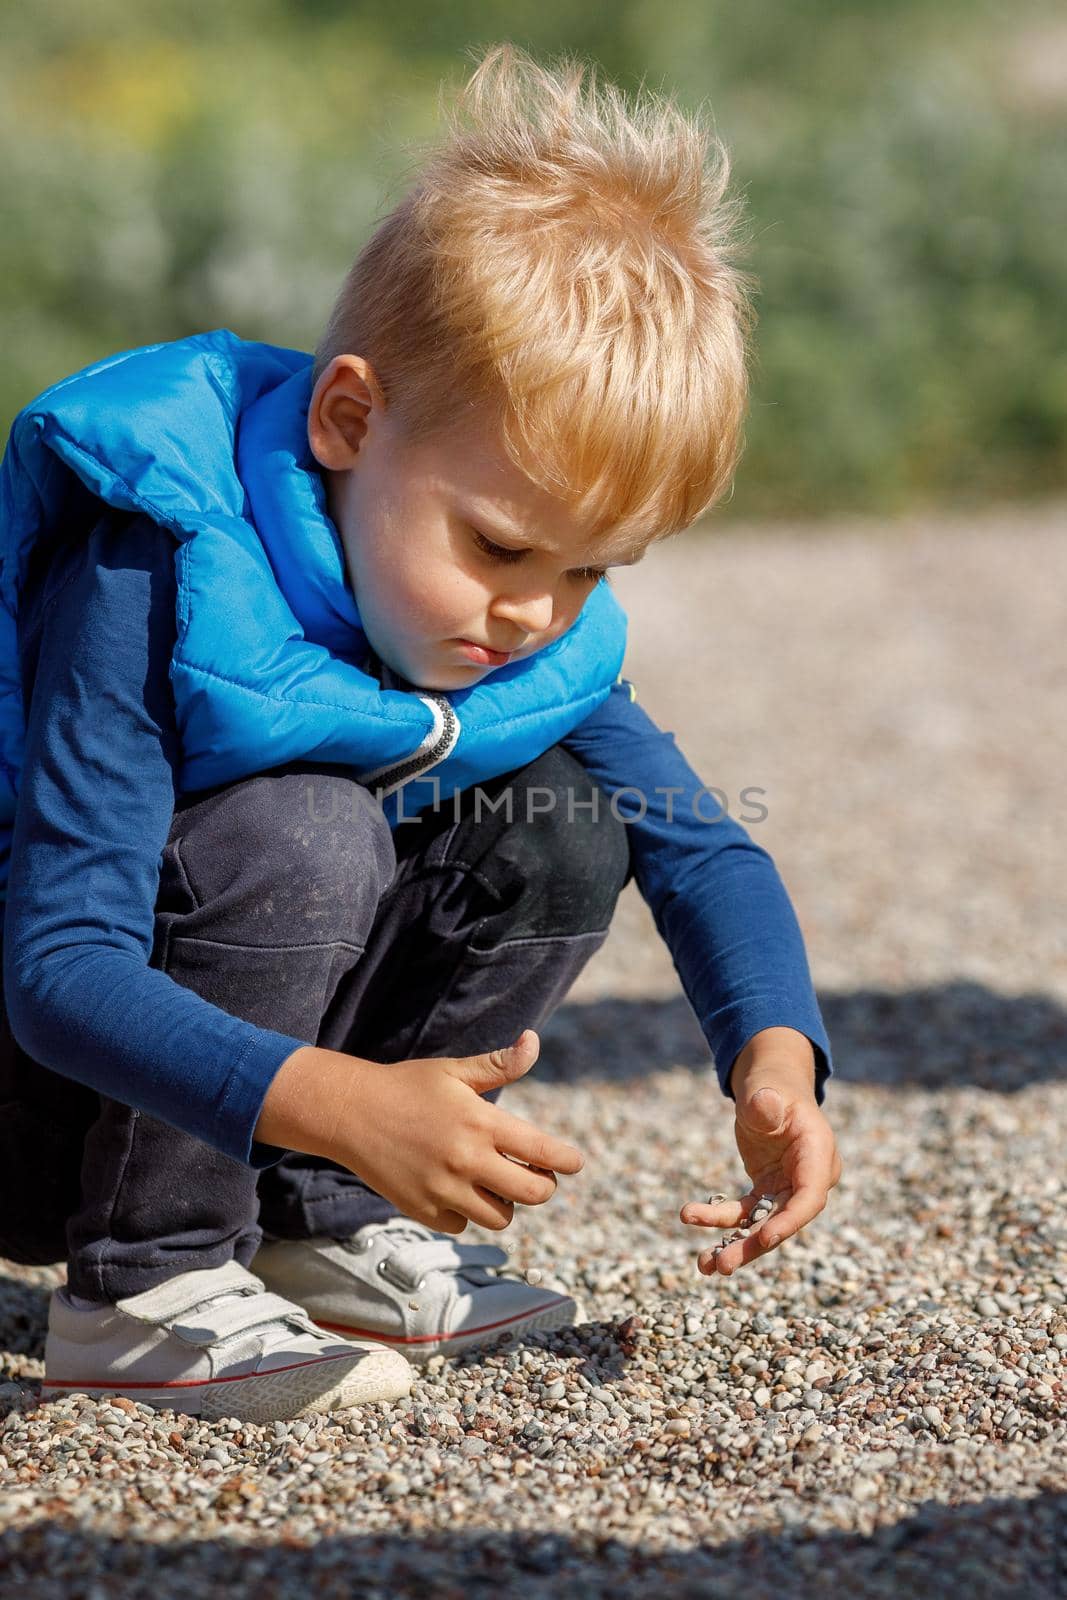 A little boy with a blue vest plays outdoors with small pebbles. The child explores the ground with his own hands, he is very interested in small pebbles.